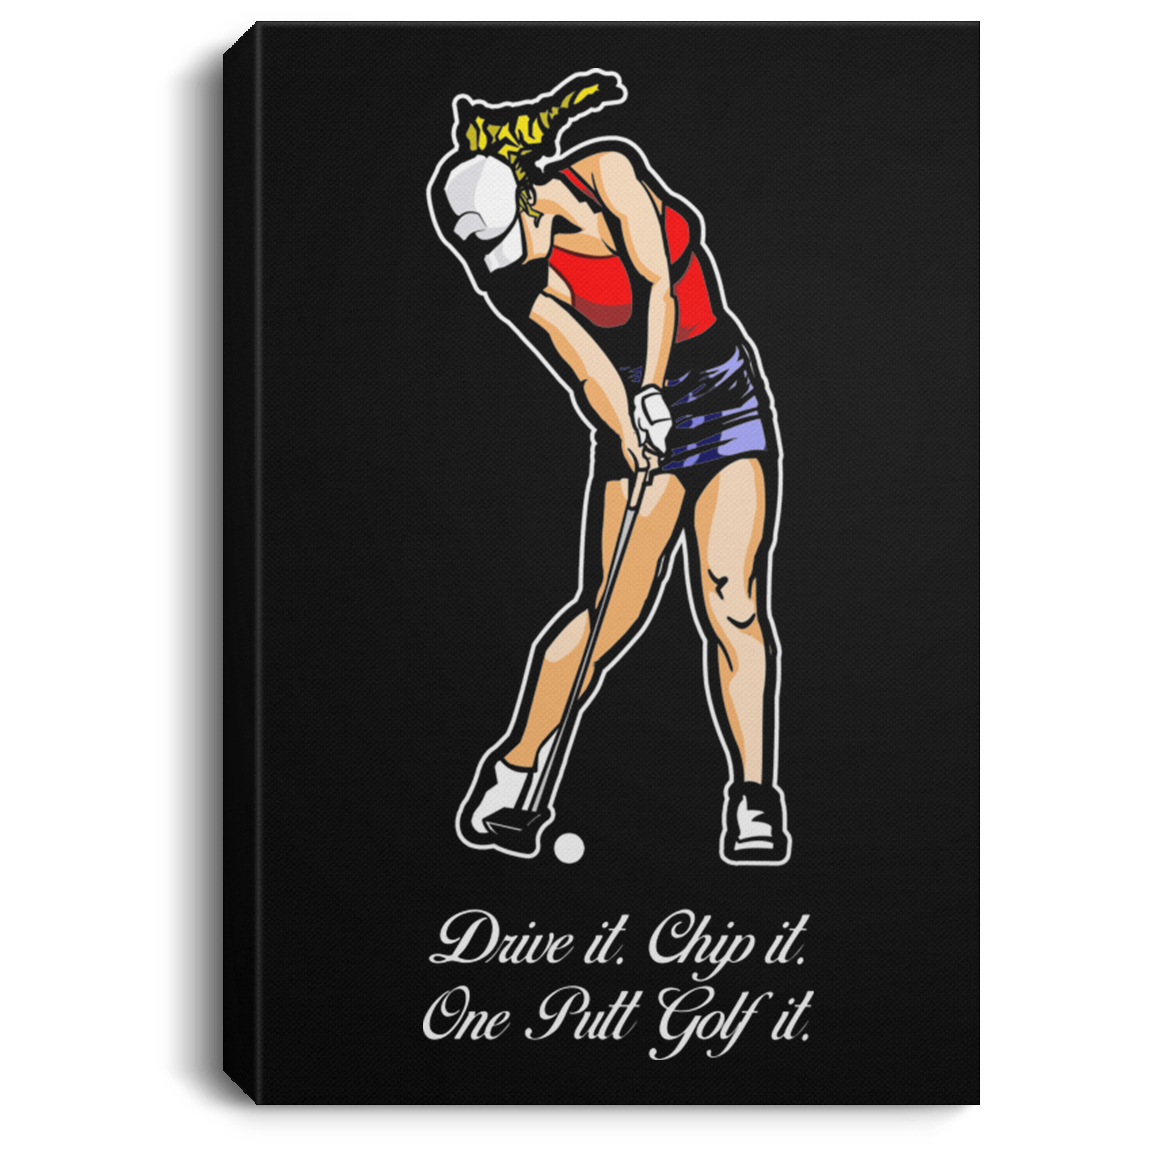 OPG Custom Design #9. Drive it. Chip it. One Putt Golf it. Portrait Canvas .75in Frame